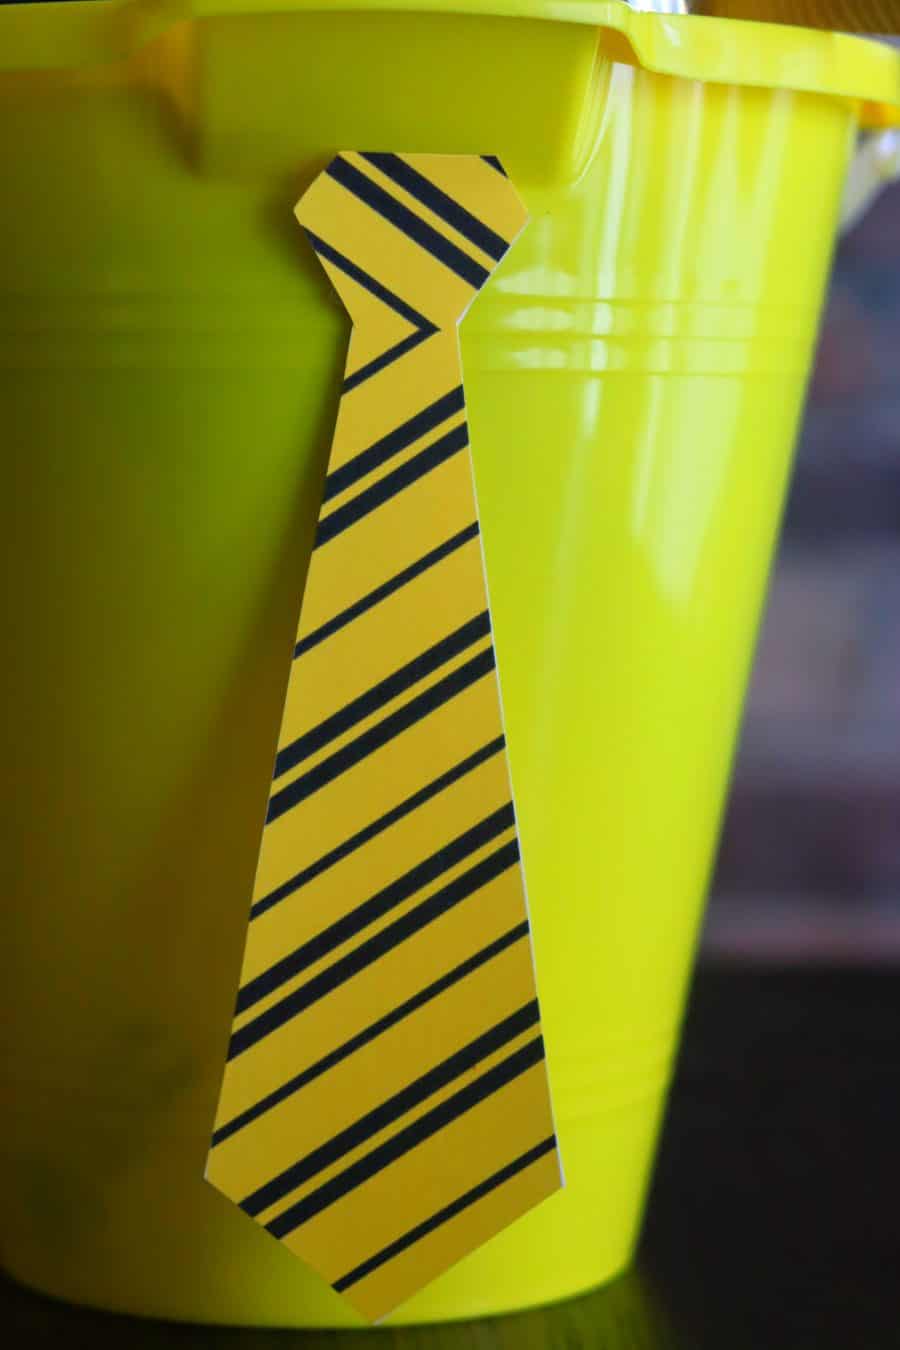 yellow and black striped tie attached to a bucket